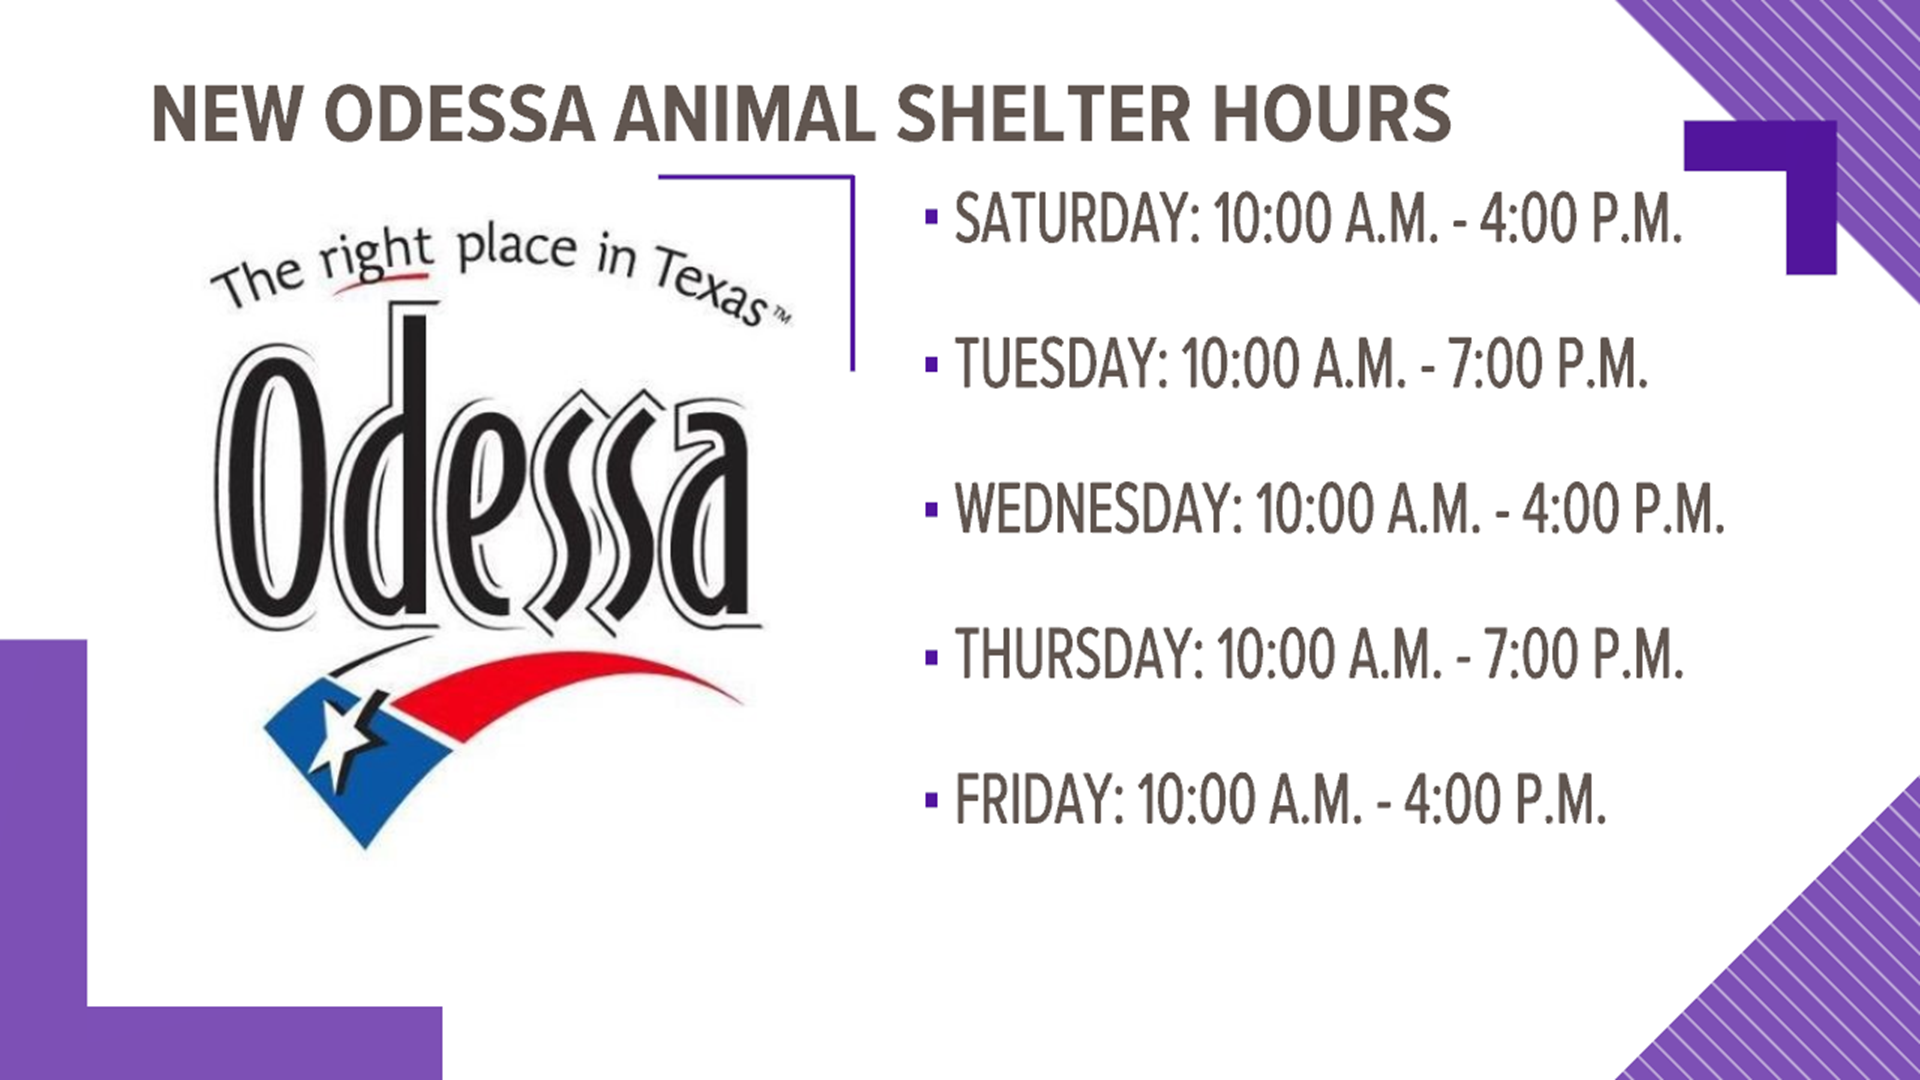 The Odessa Animal Shelter has changed the hours of operation to better serve the community.